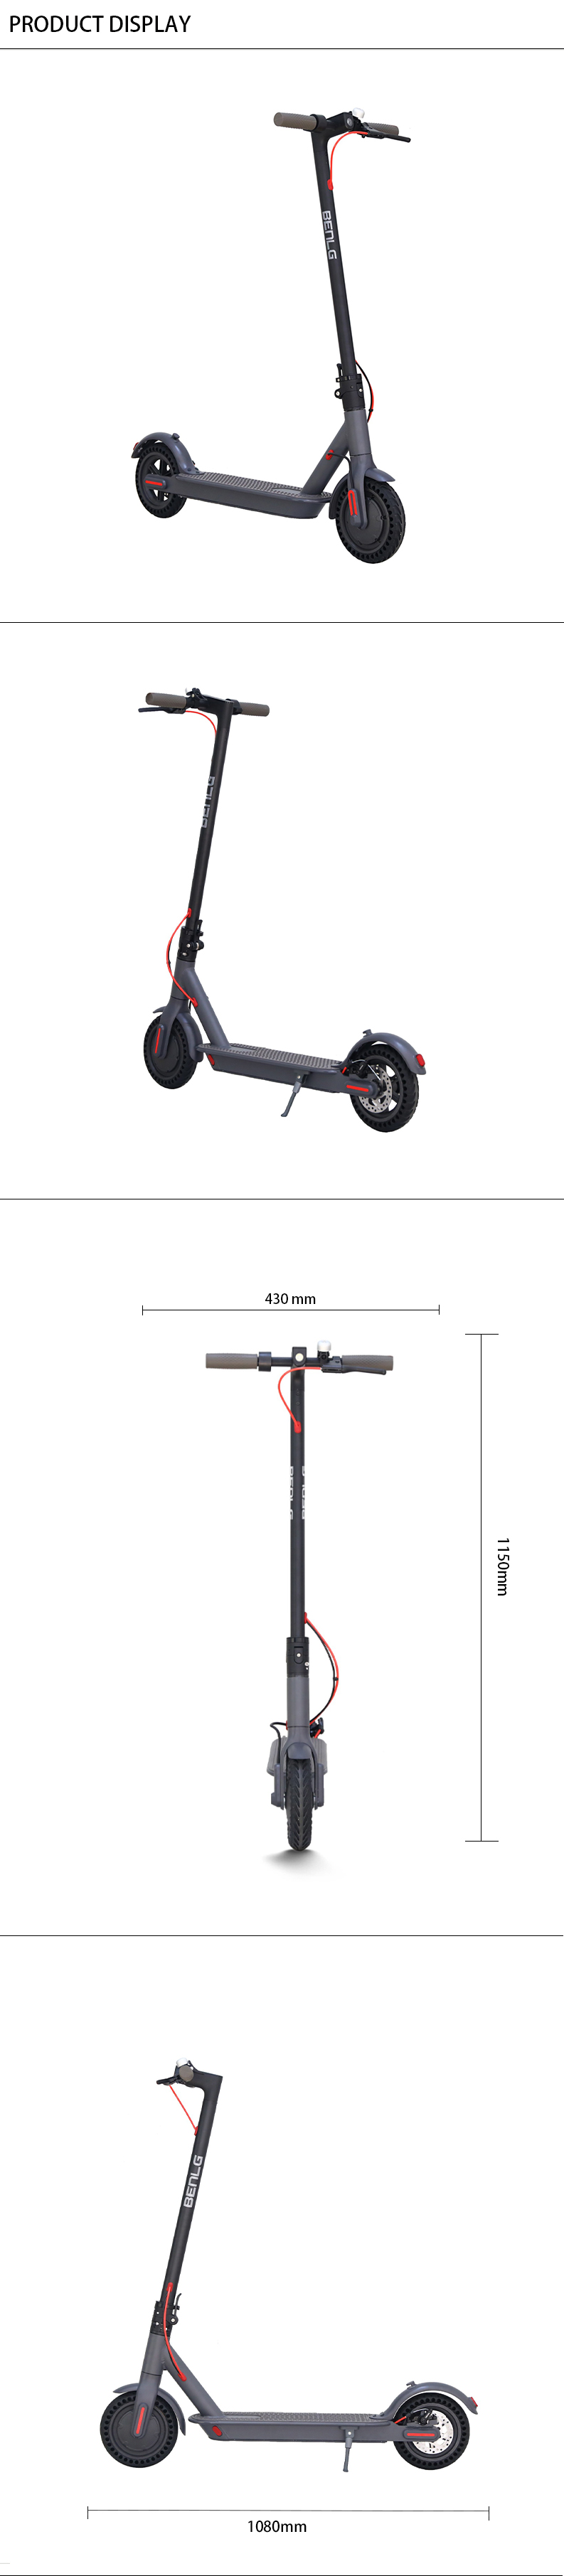 Electric Adult Scooter For Sale，E-Scooter Ce Eec High Speed Lthium Battery